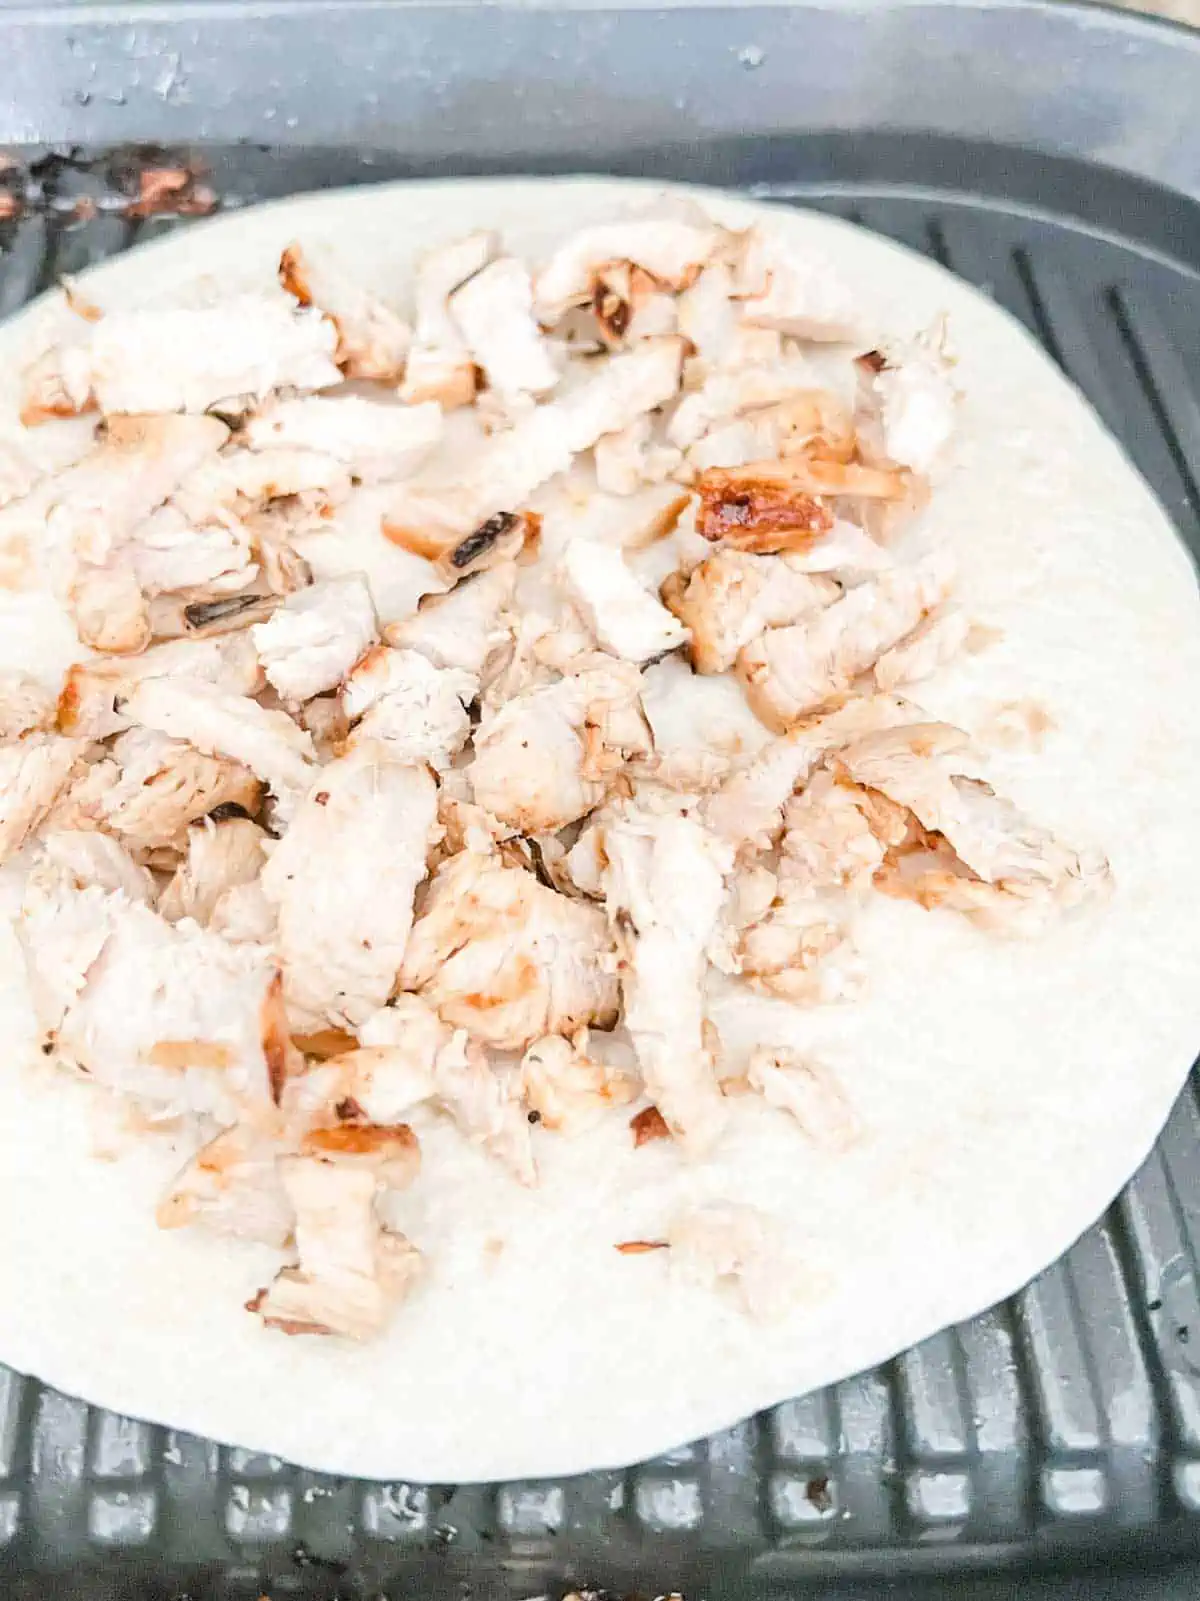 Chopped chicken on a tortilla sitting on a grill.